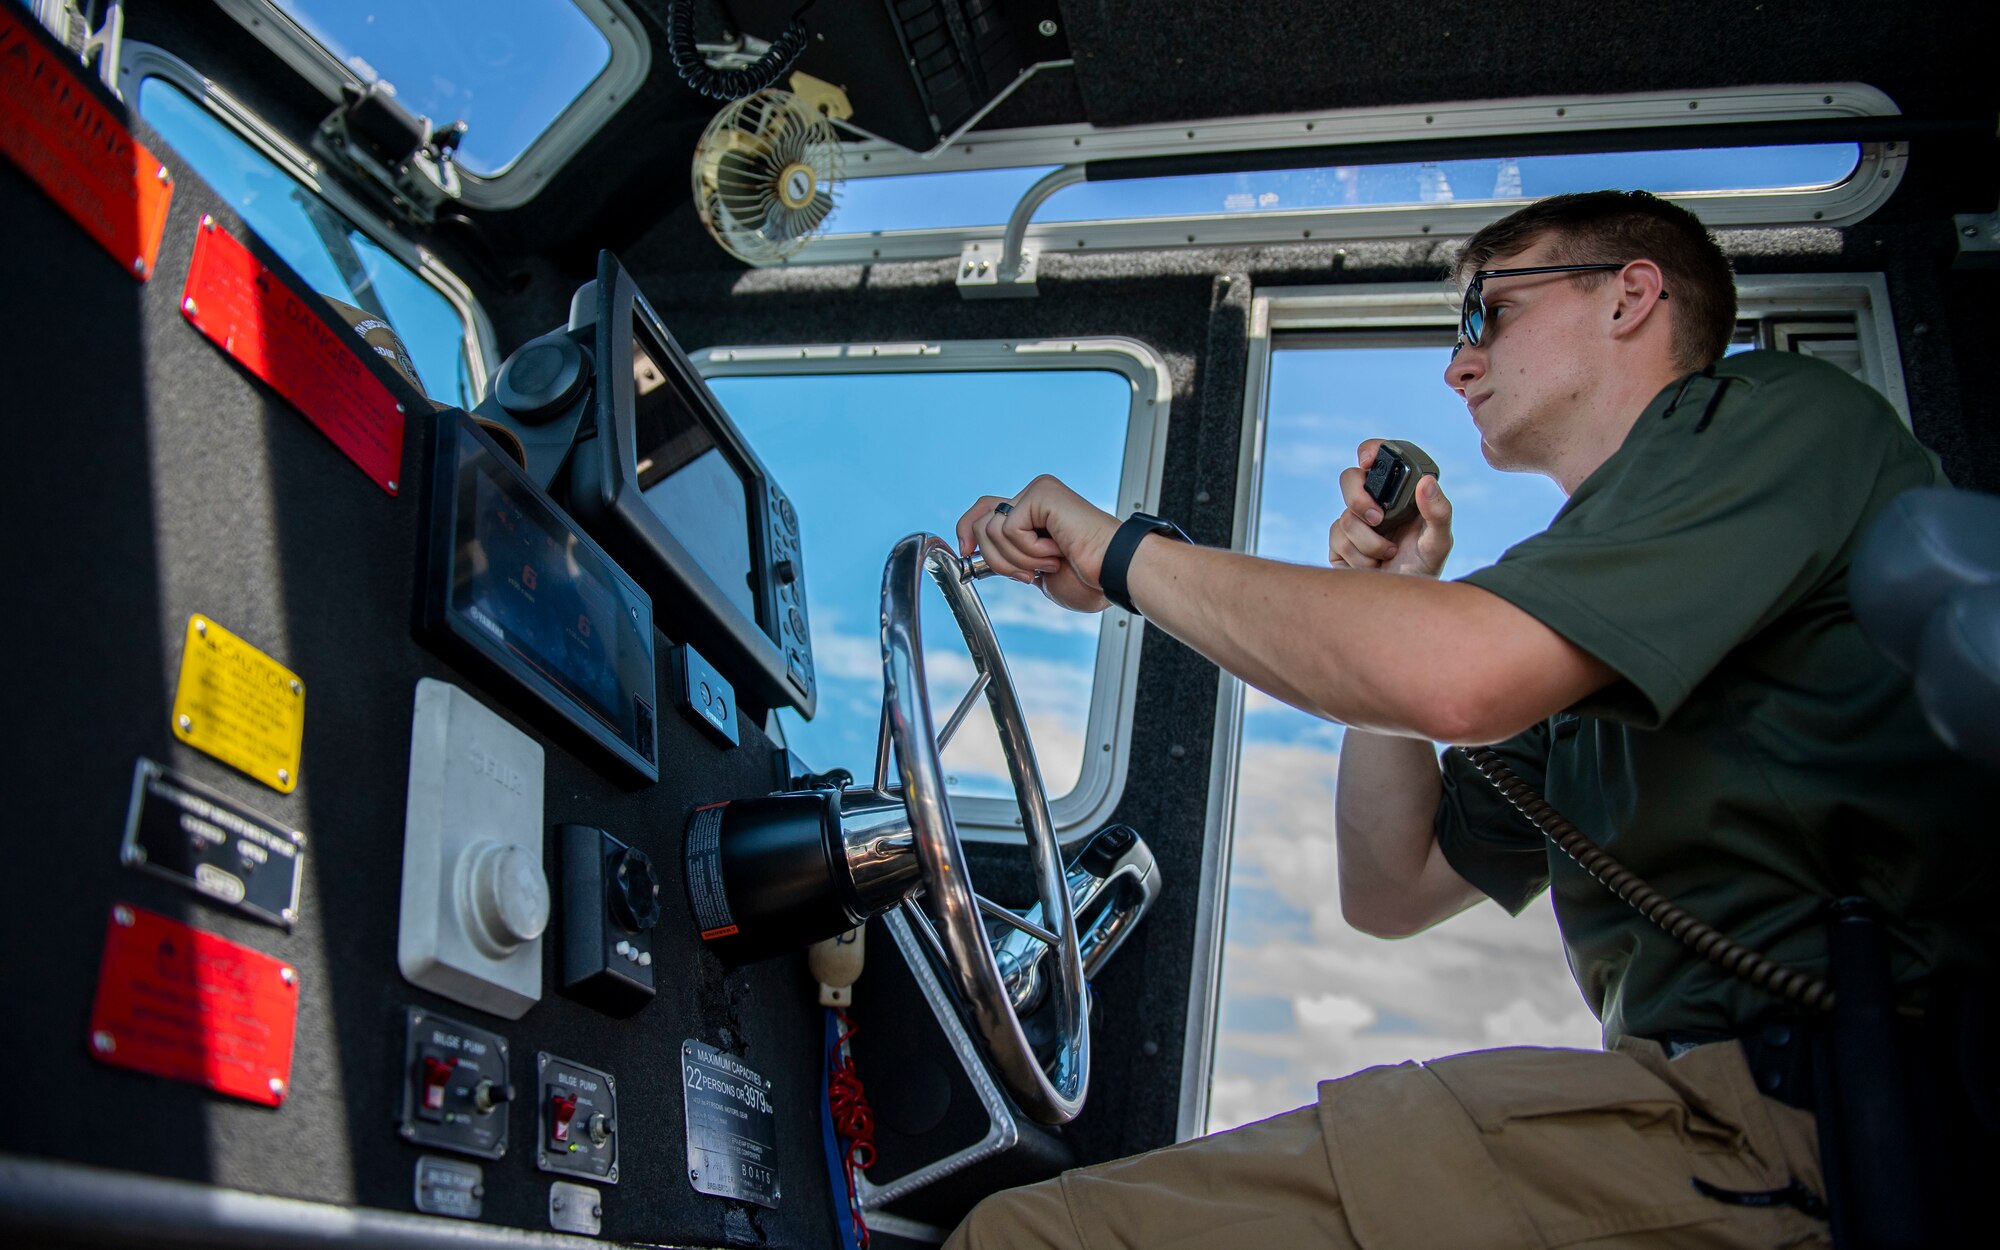 U.S. Air Force Airman 1st Class Sabin Venable, 6th Security Forces Squadron marine patrolman, operates a vessel at MacDill Air Force Base, Florida, July 10, 2022. Marine patrolmen utilize patrol boats, jet skis, and all-terrain vehicles to monitor coastal restricted areas surrounding MacDill AFB which include shallow waterways accessible only by jet ski. (U.S. Air Force photo by Airman 1st Class Lauren Cobin)